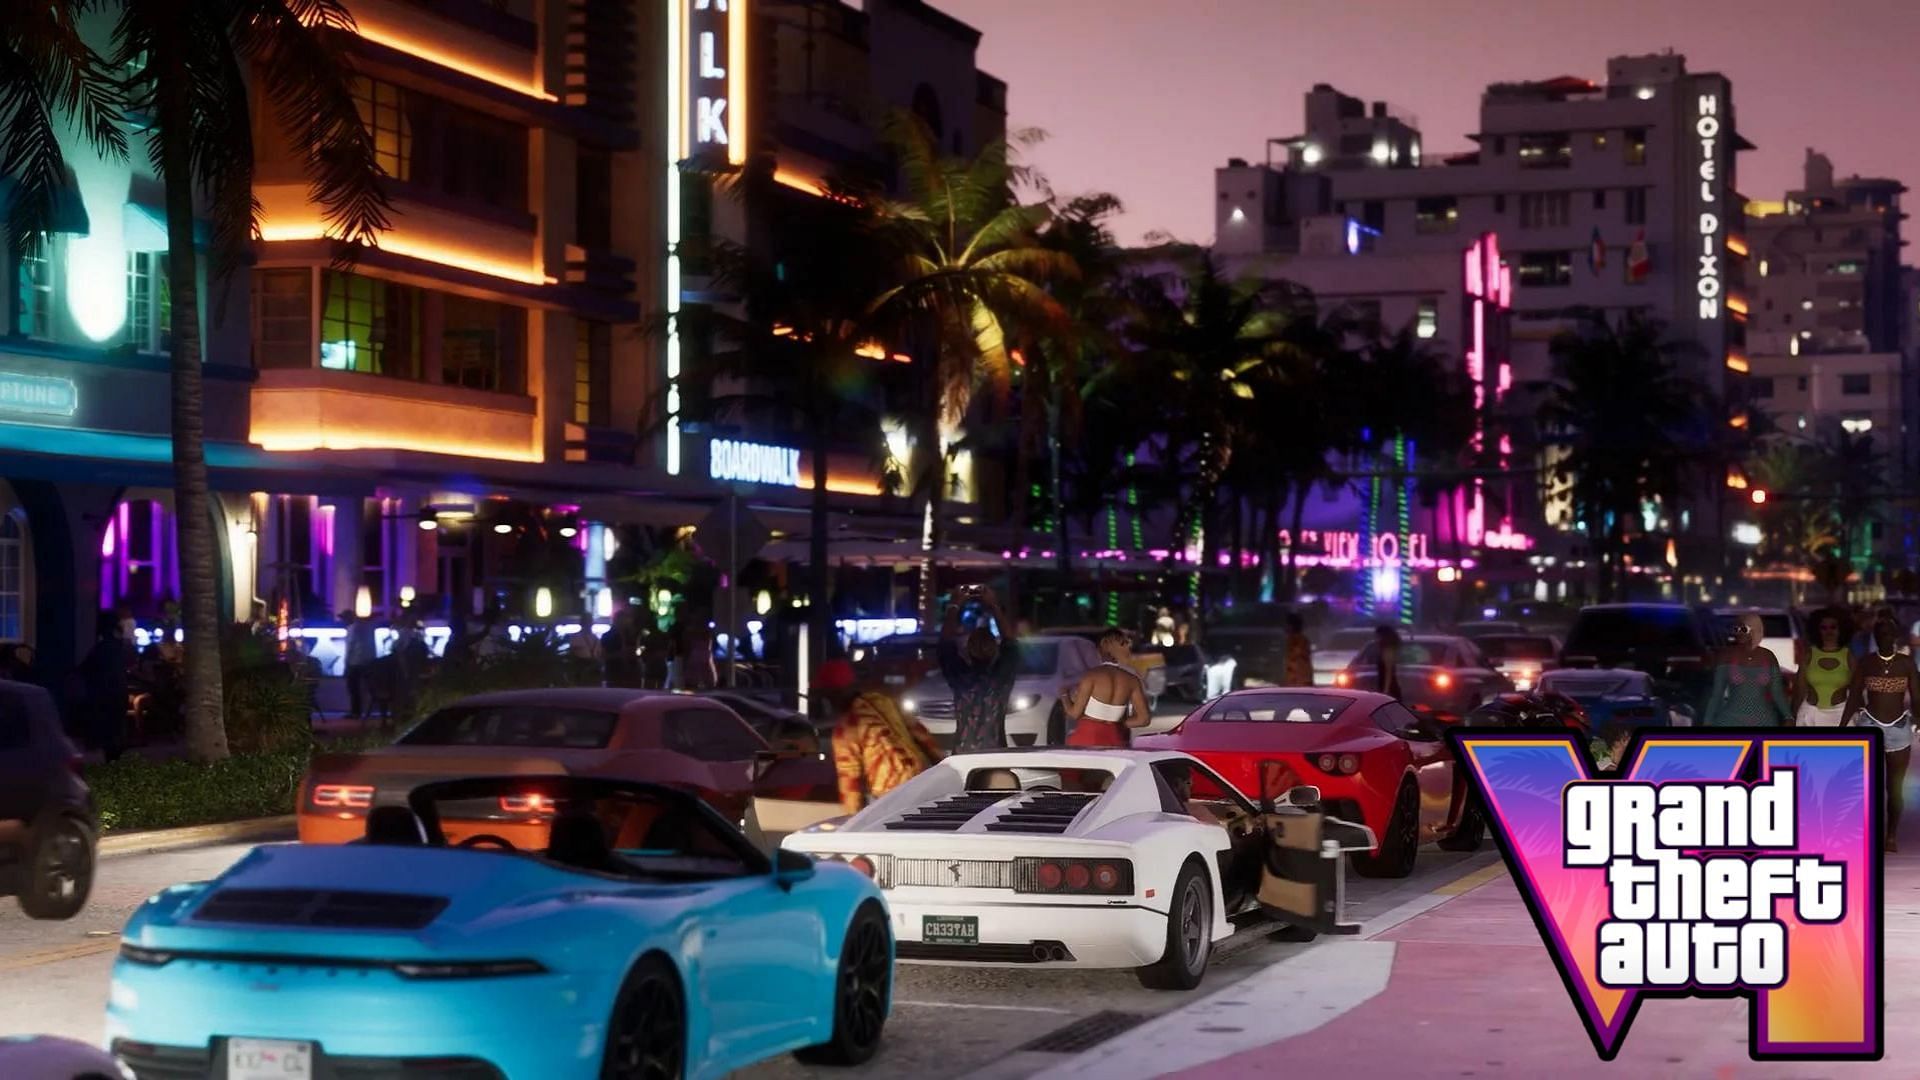 One of the locations shown in the GTA 6 trailer (Image via Rockstar Games)